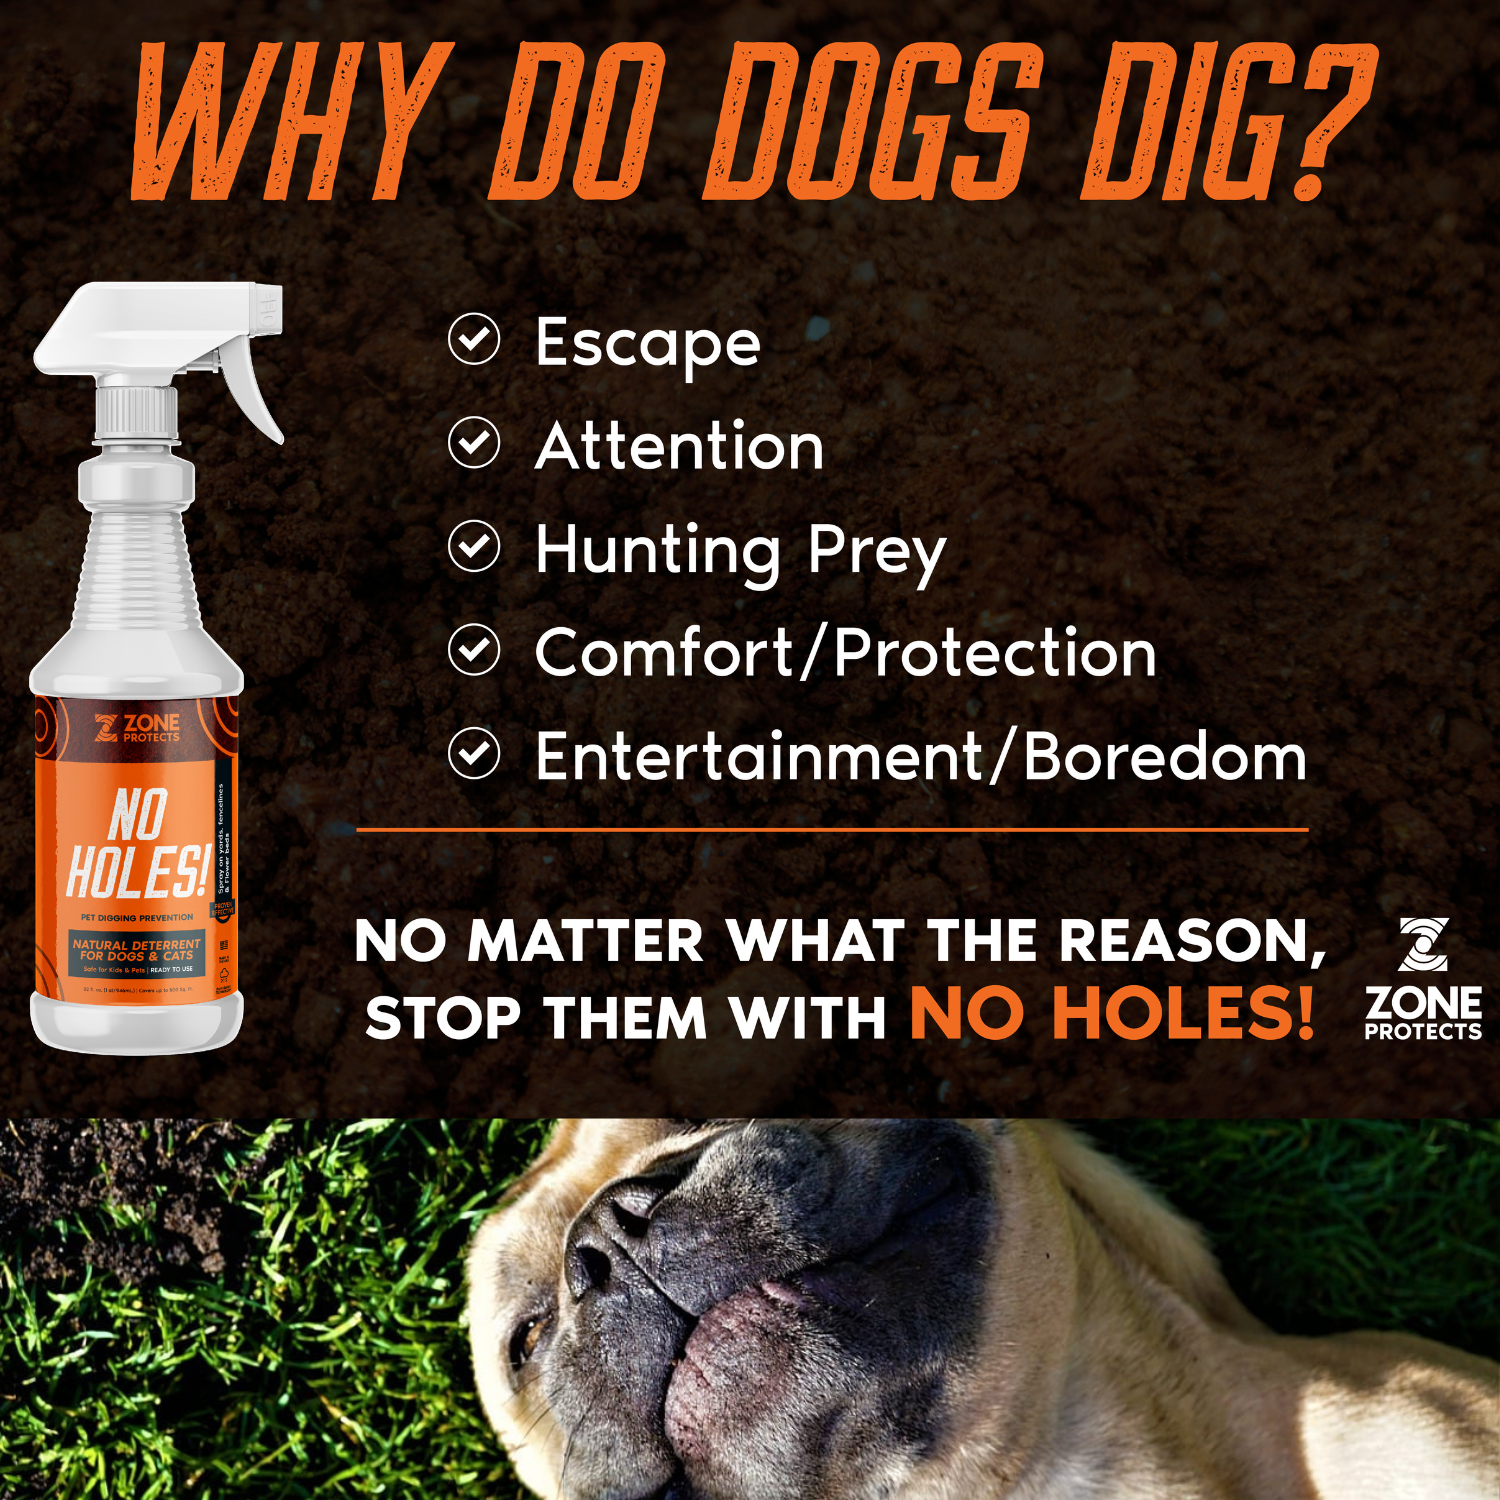 Zone Protects No Holes! Digging Dog Prevention; Twin Spray Bundle